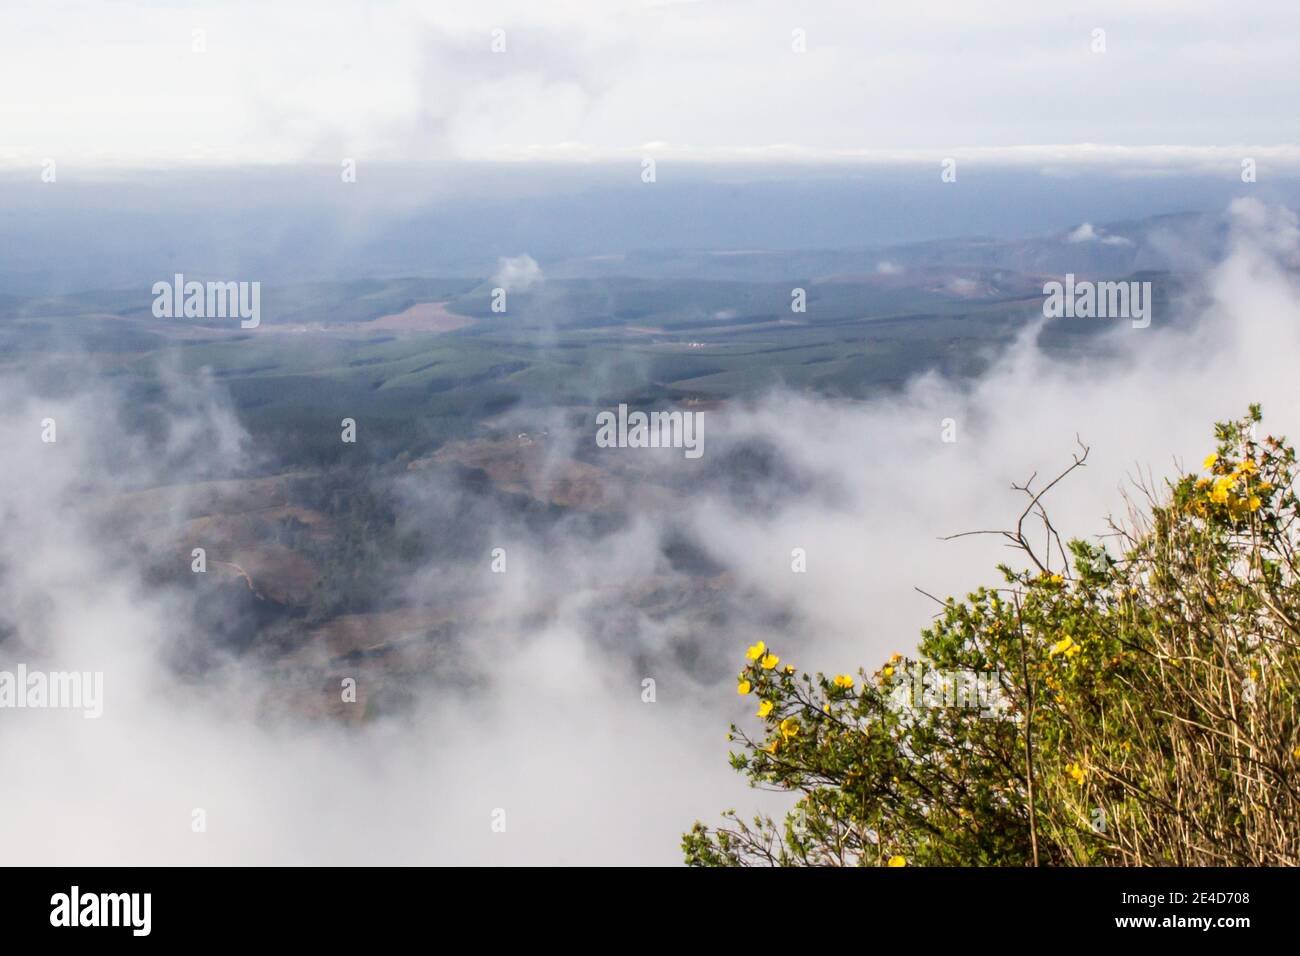 Clouds in the morning pulling back to reveal the vast expanse of the South African Lowveld, as seen from Wonder view viewpoint Stock Photo